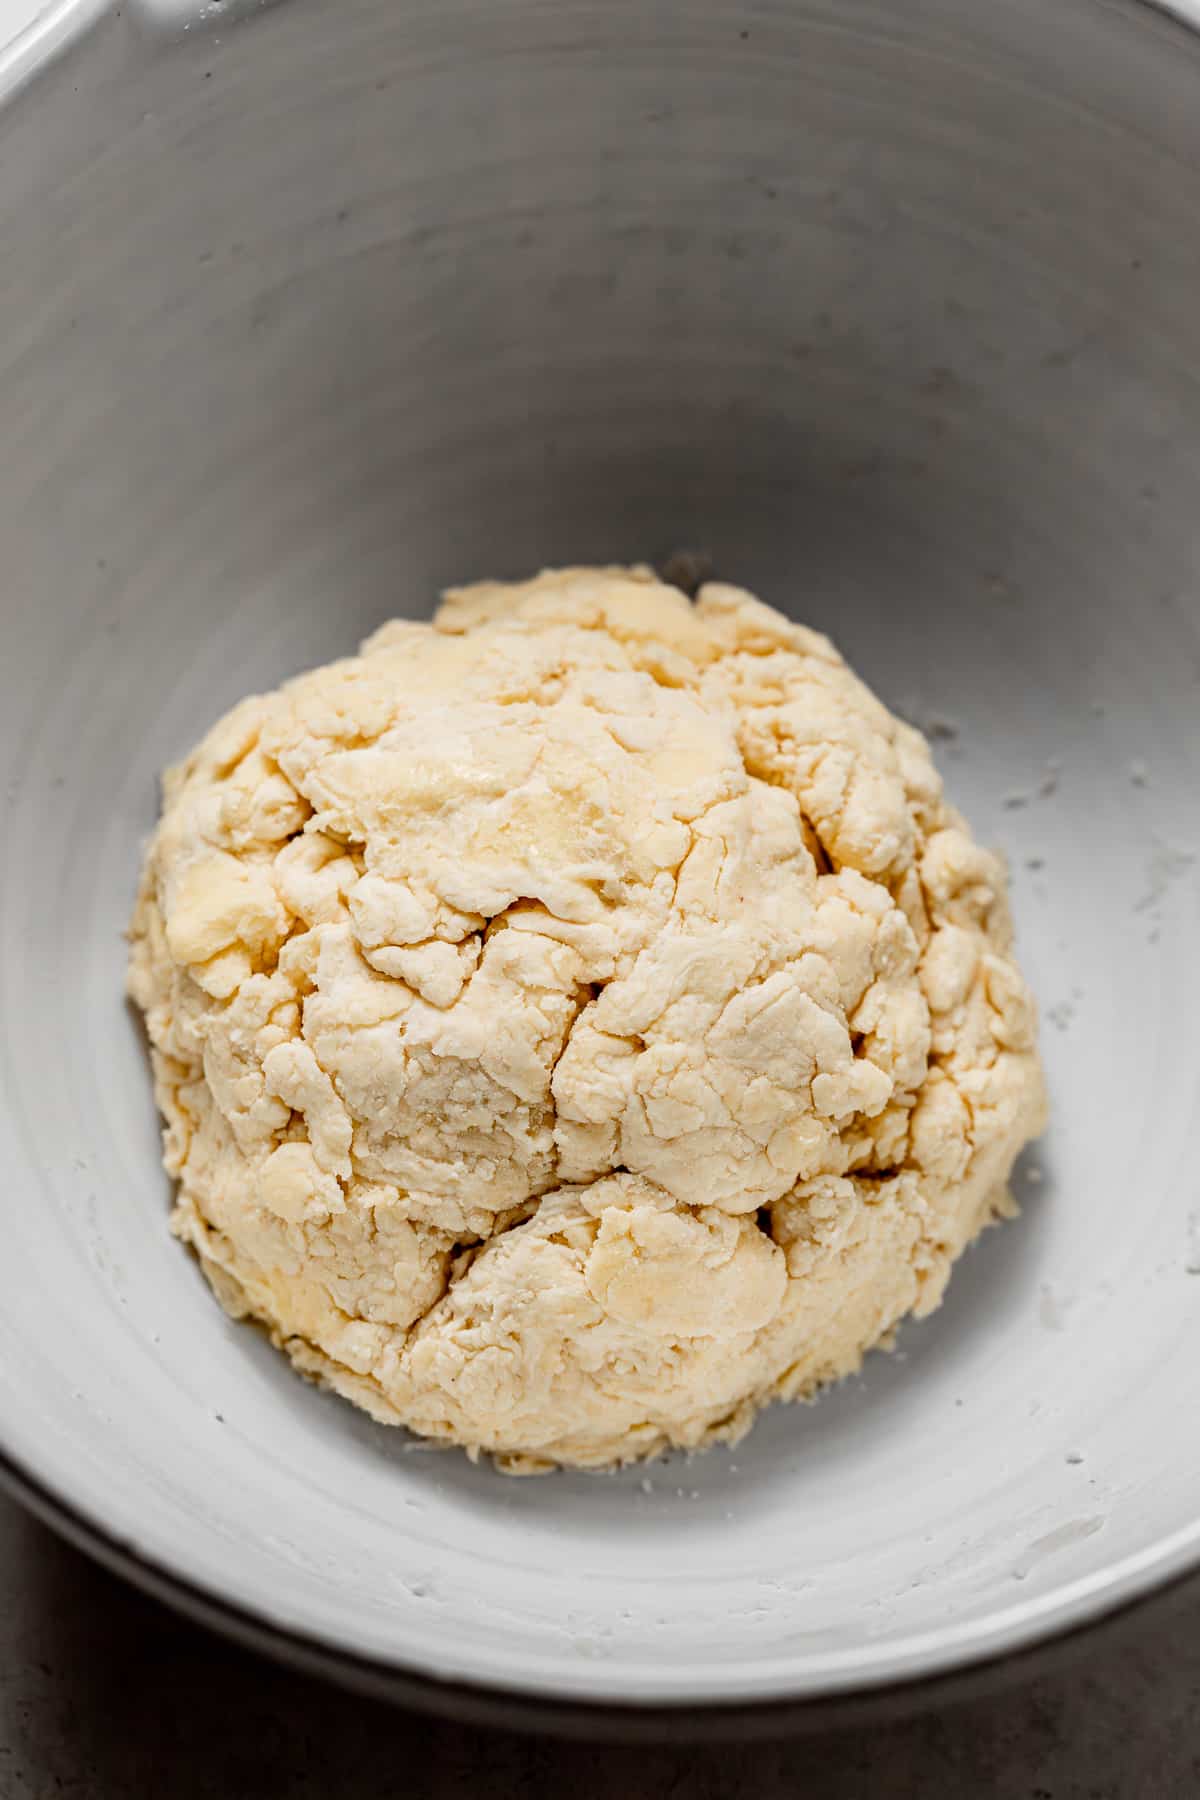 pie crust dough fully hydrated in bowl.